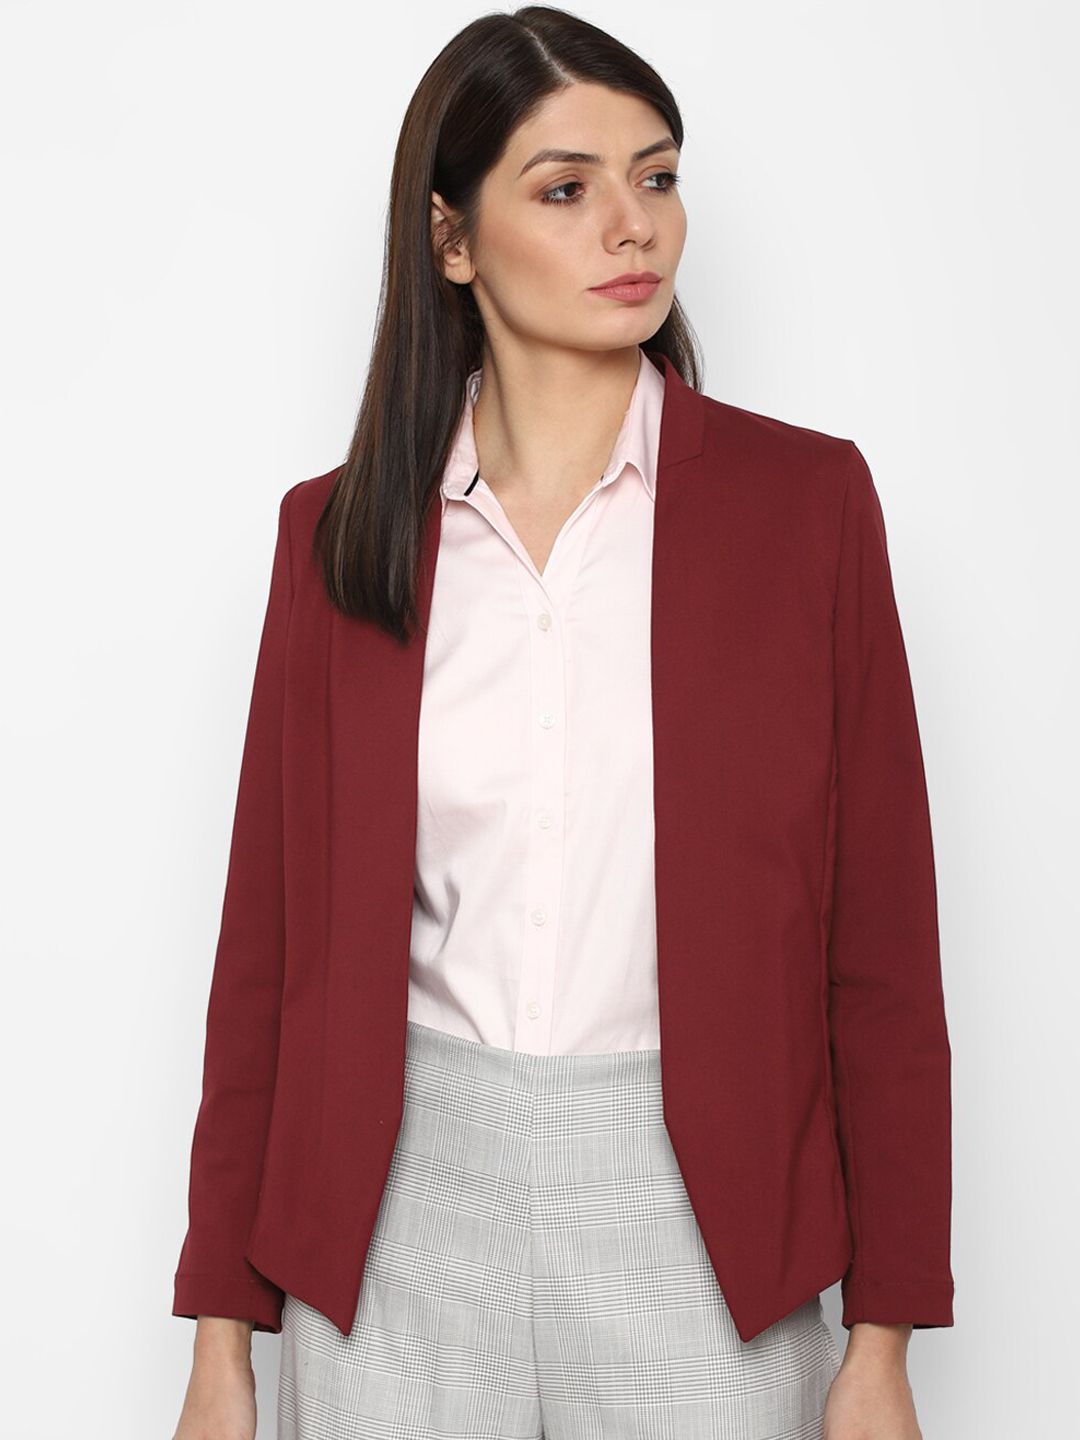 Allen Solly Woman Maroon Solid Single-Breasted Casual Blazer Price in India